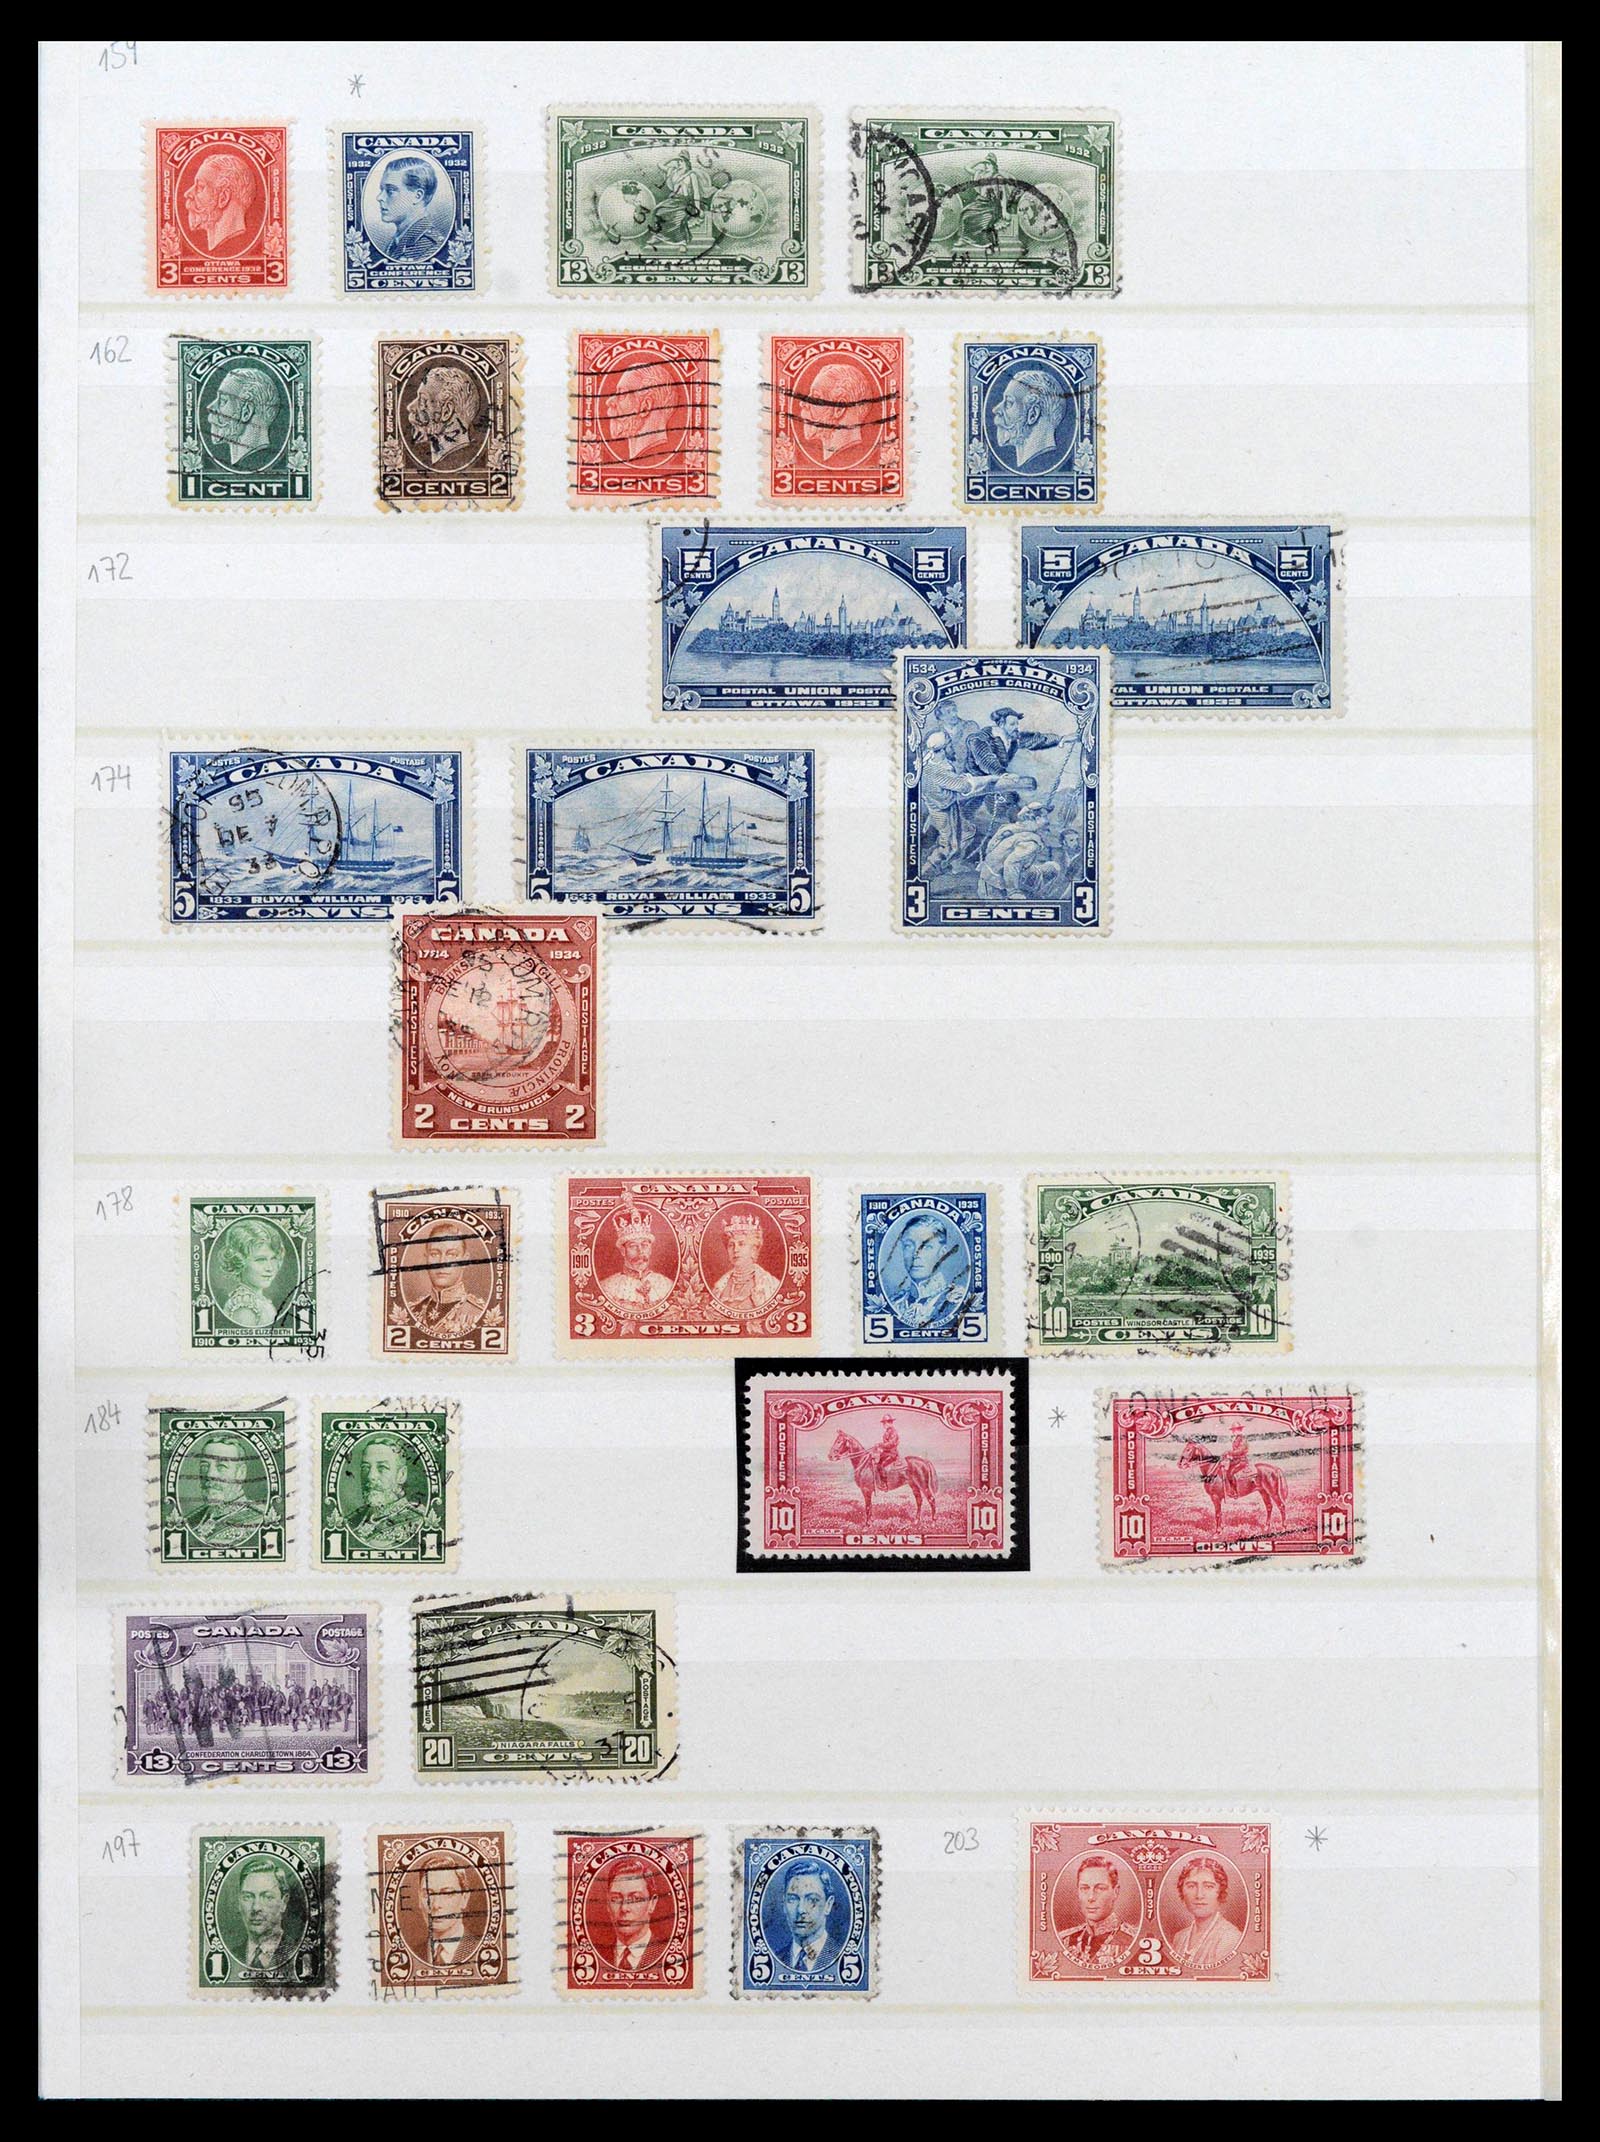 39199 0025 - Stamp collection 39199 Canada and provinces 1851-1970.